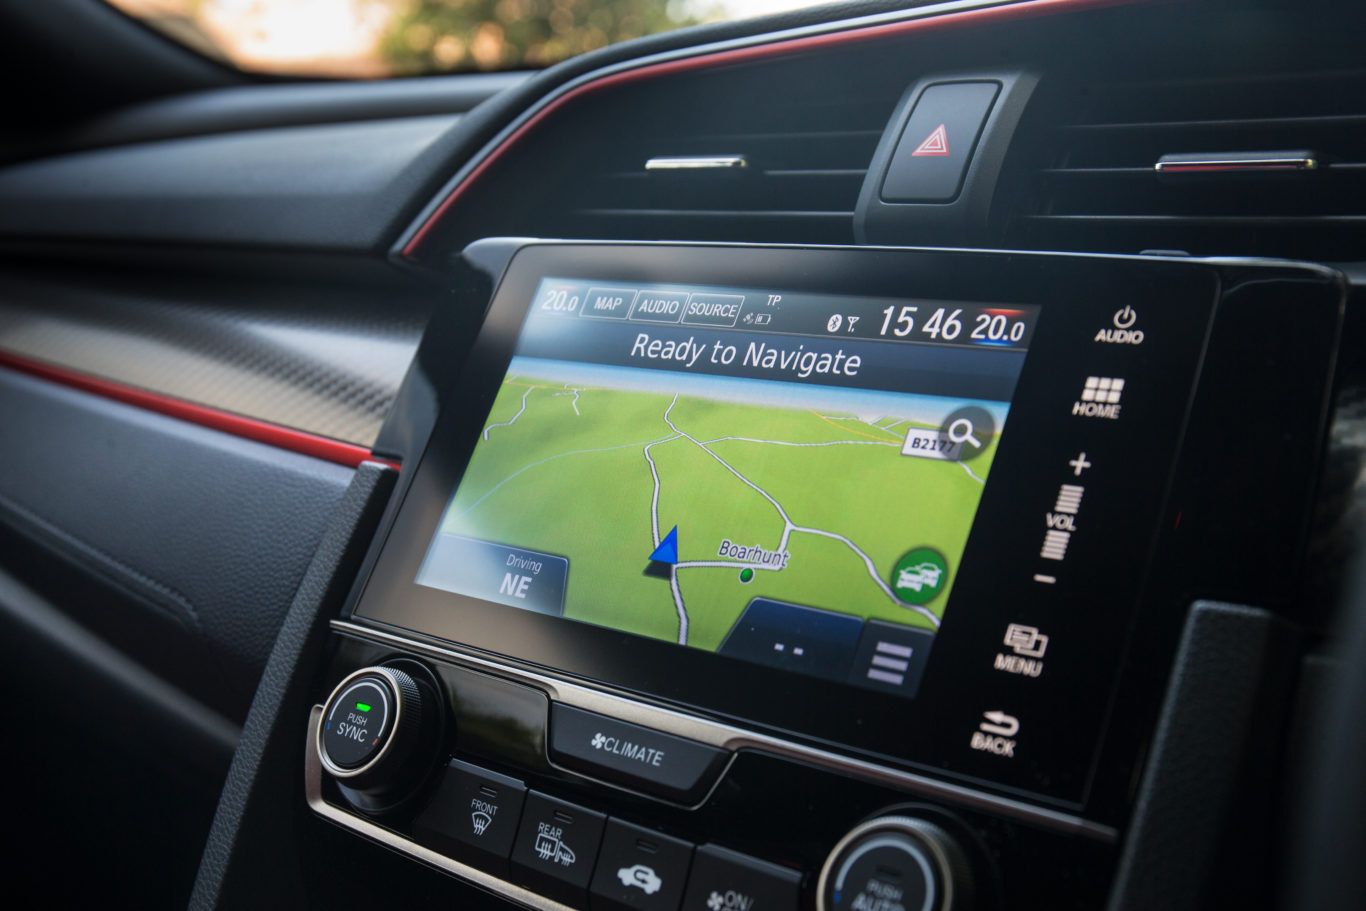 The Honda's infotainment system lacks the ease-of-use that we expect 